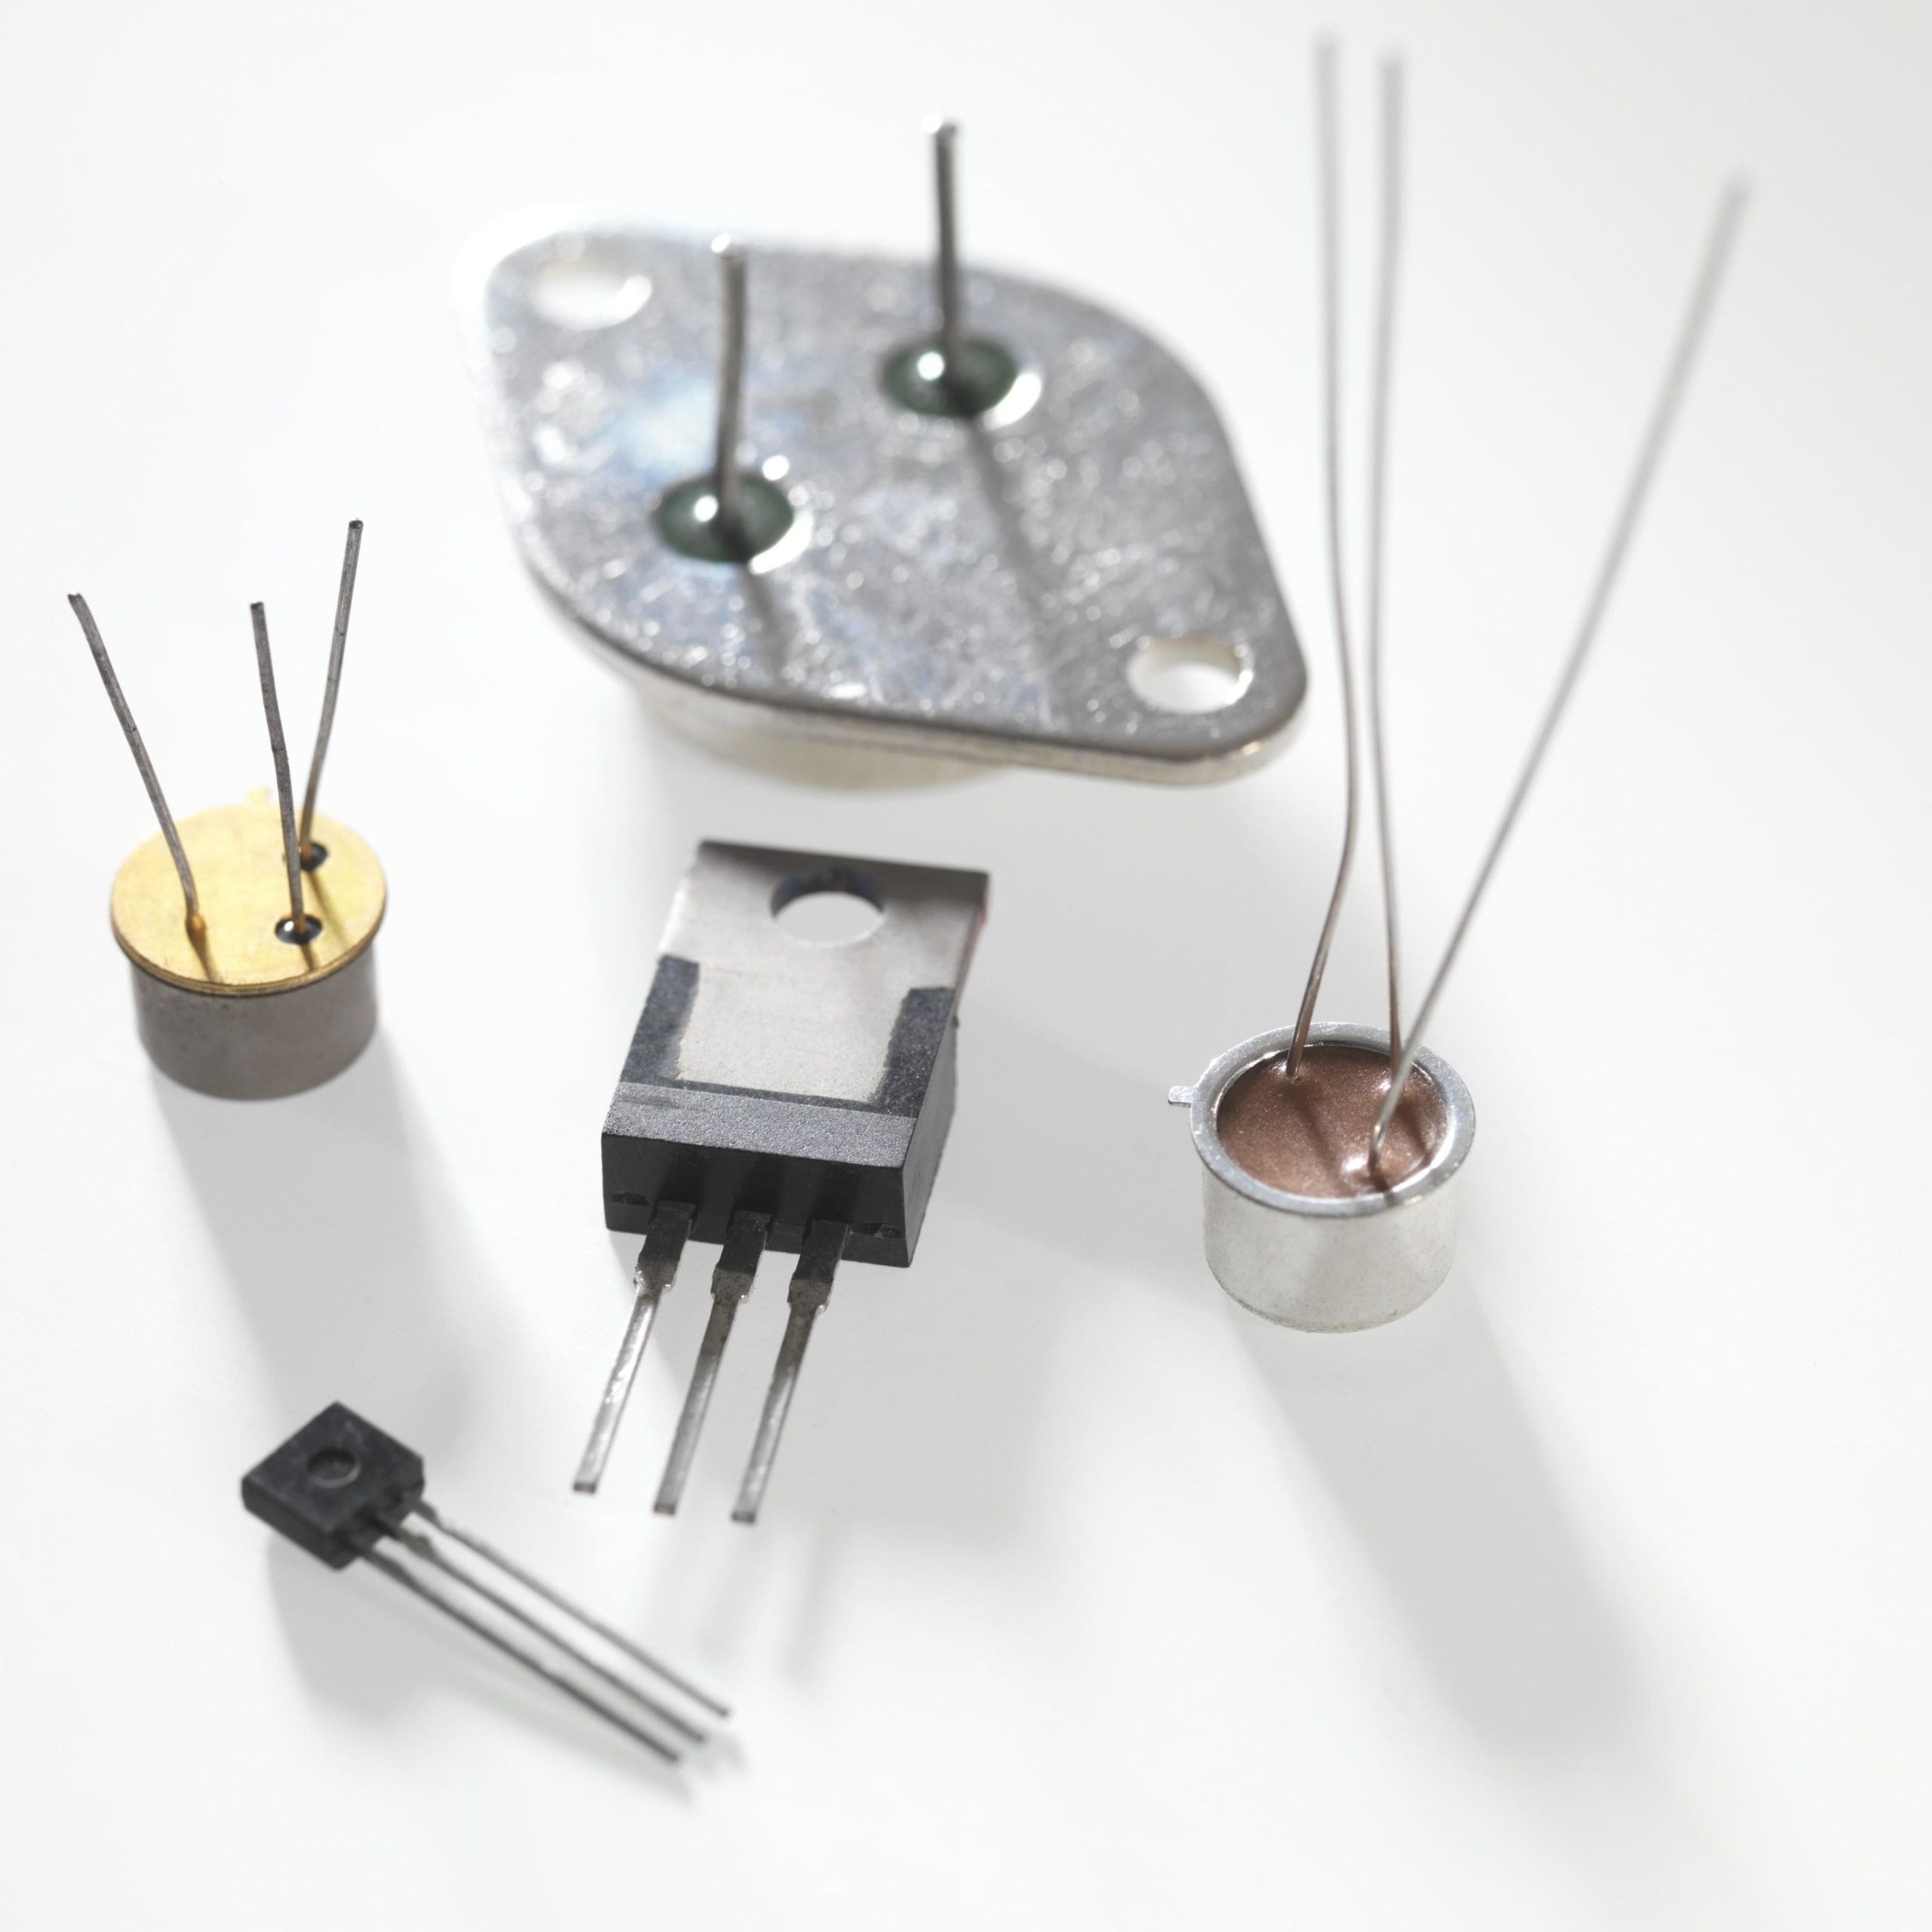 What is a transistor